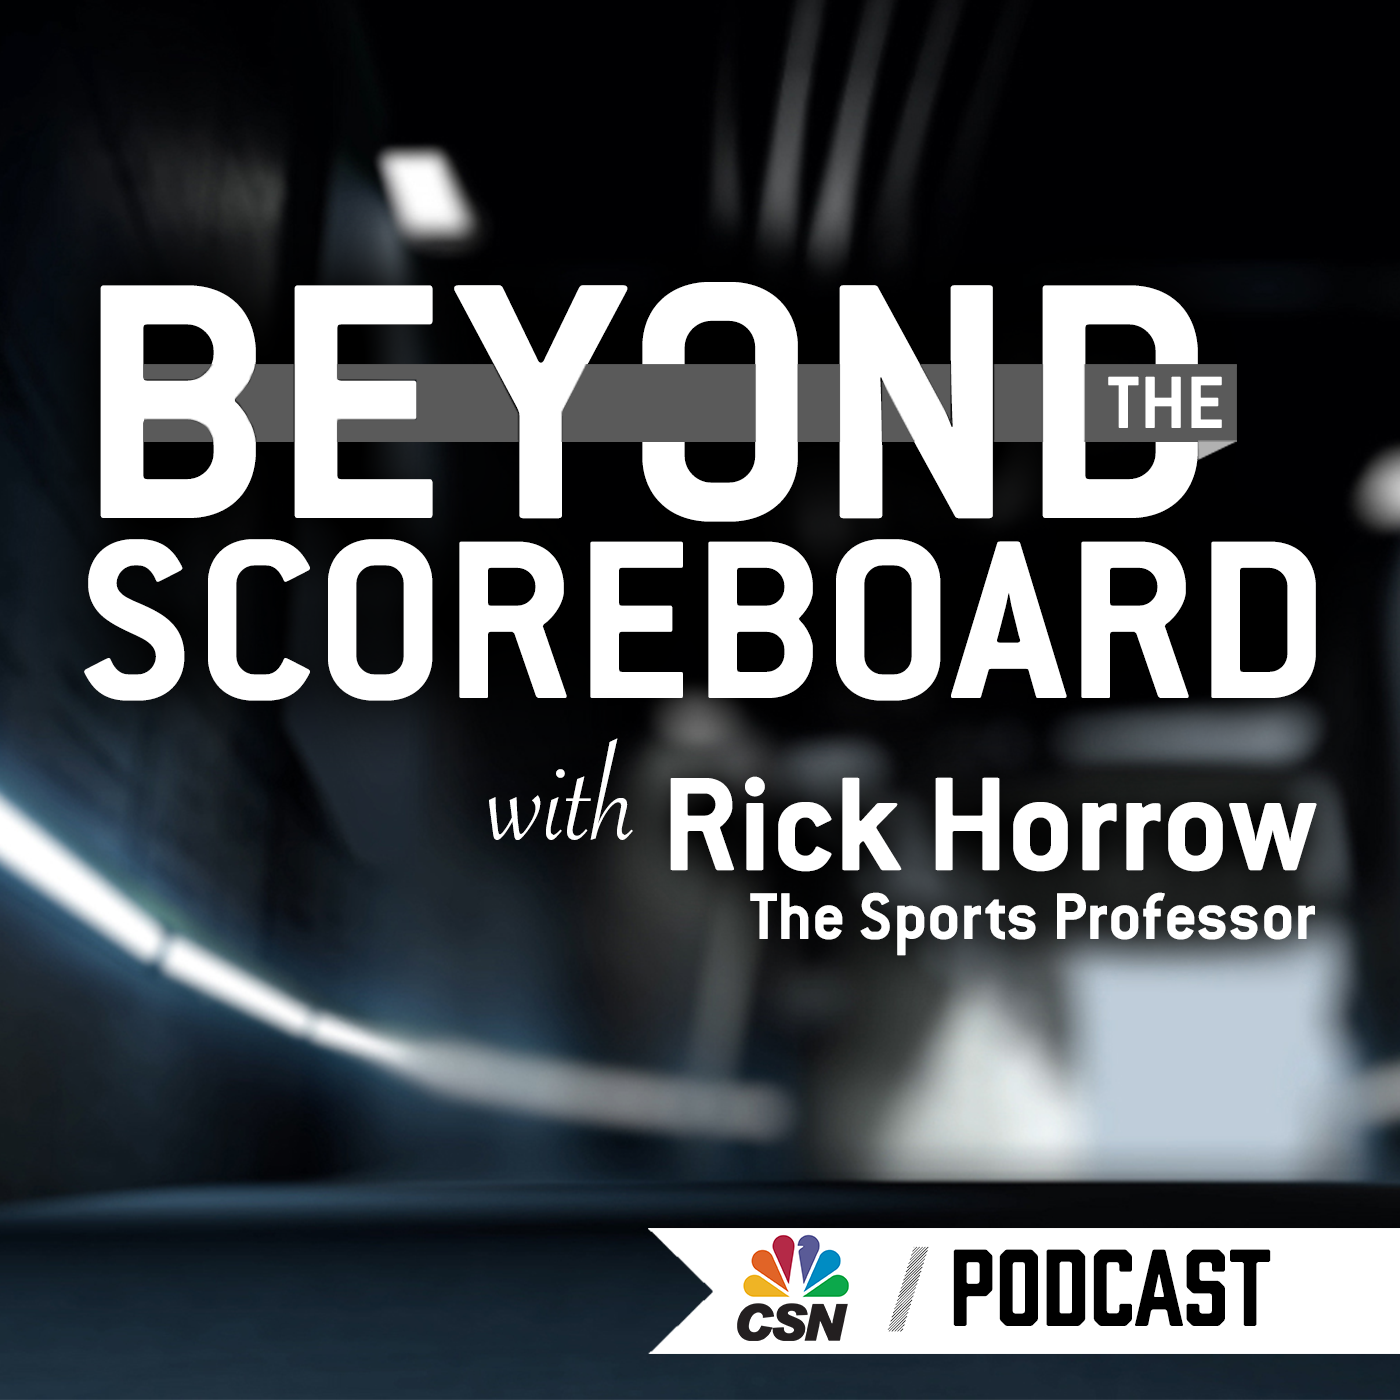 Preview: Rick Horrow hosts 